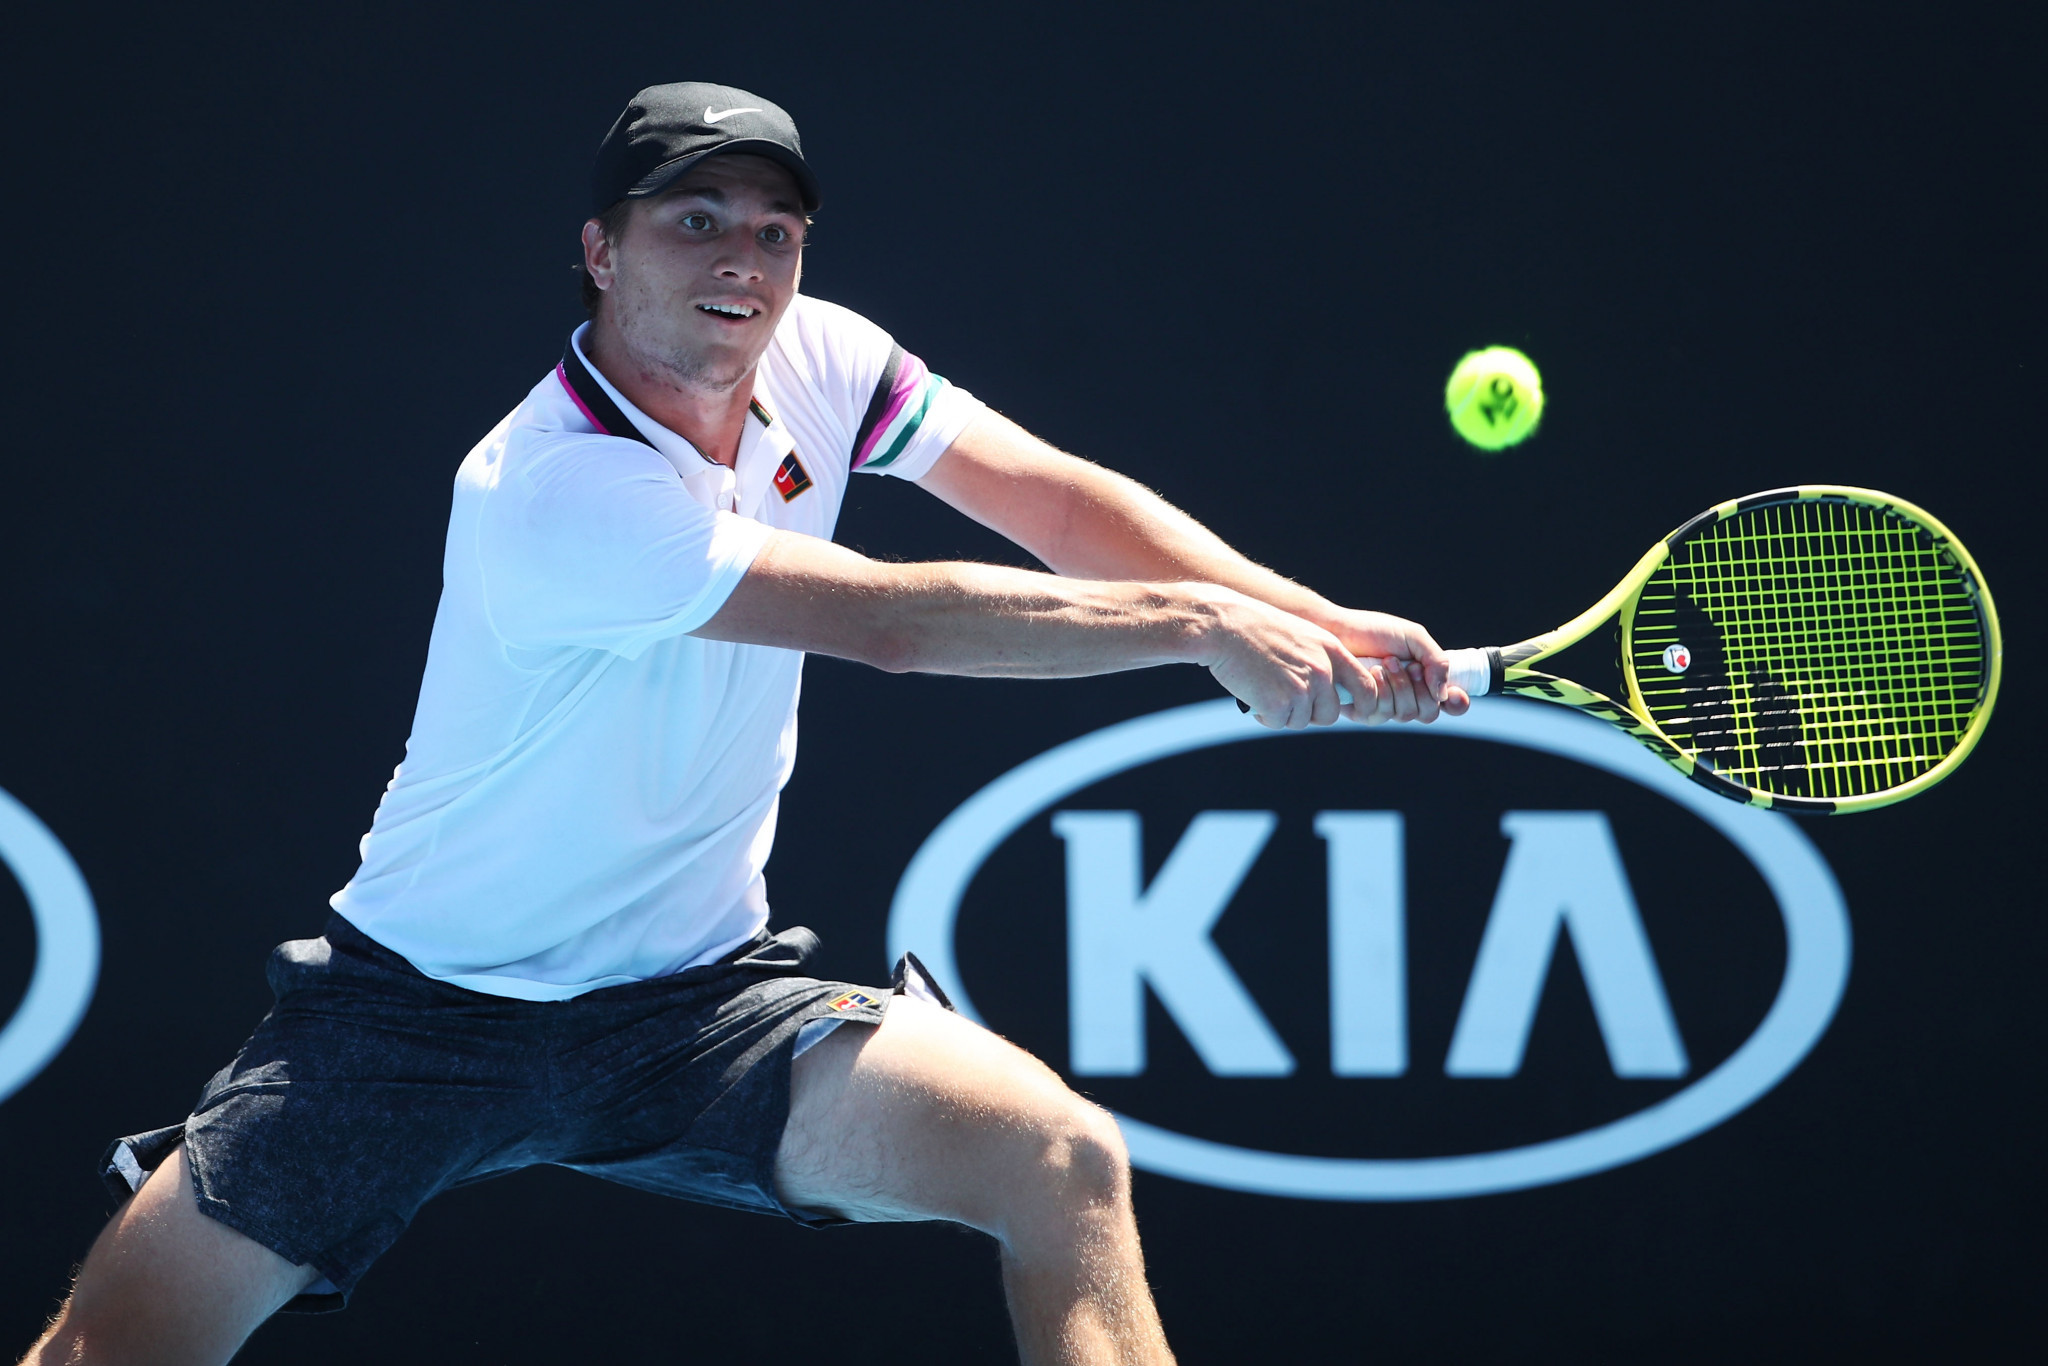 Serbia's Miomir Kecmanovic, who competed at the 2019 Australian Open, has been named as a recipient of the 2019 International Player Grand Slam Grant ©Getty Images